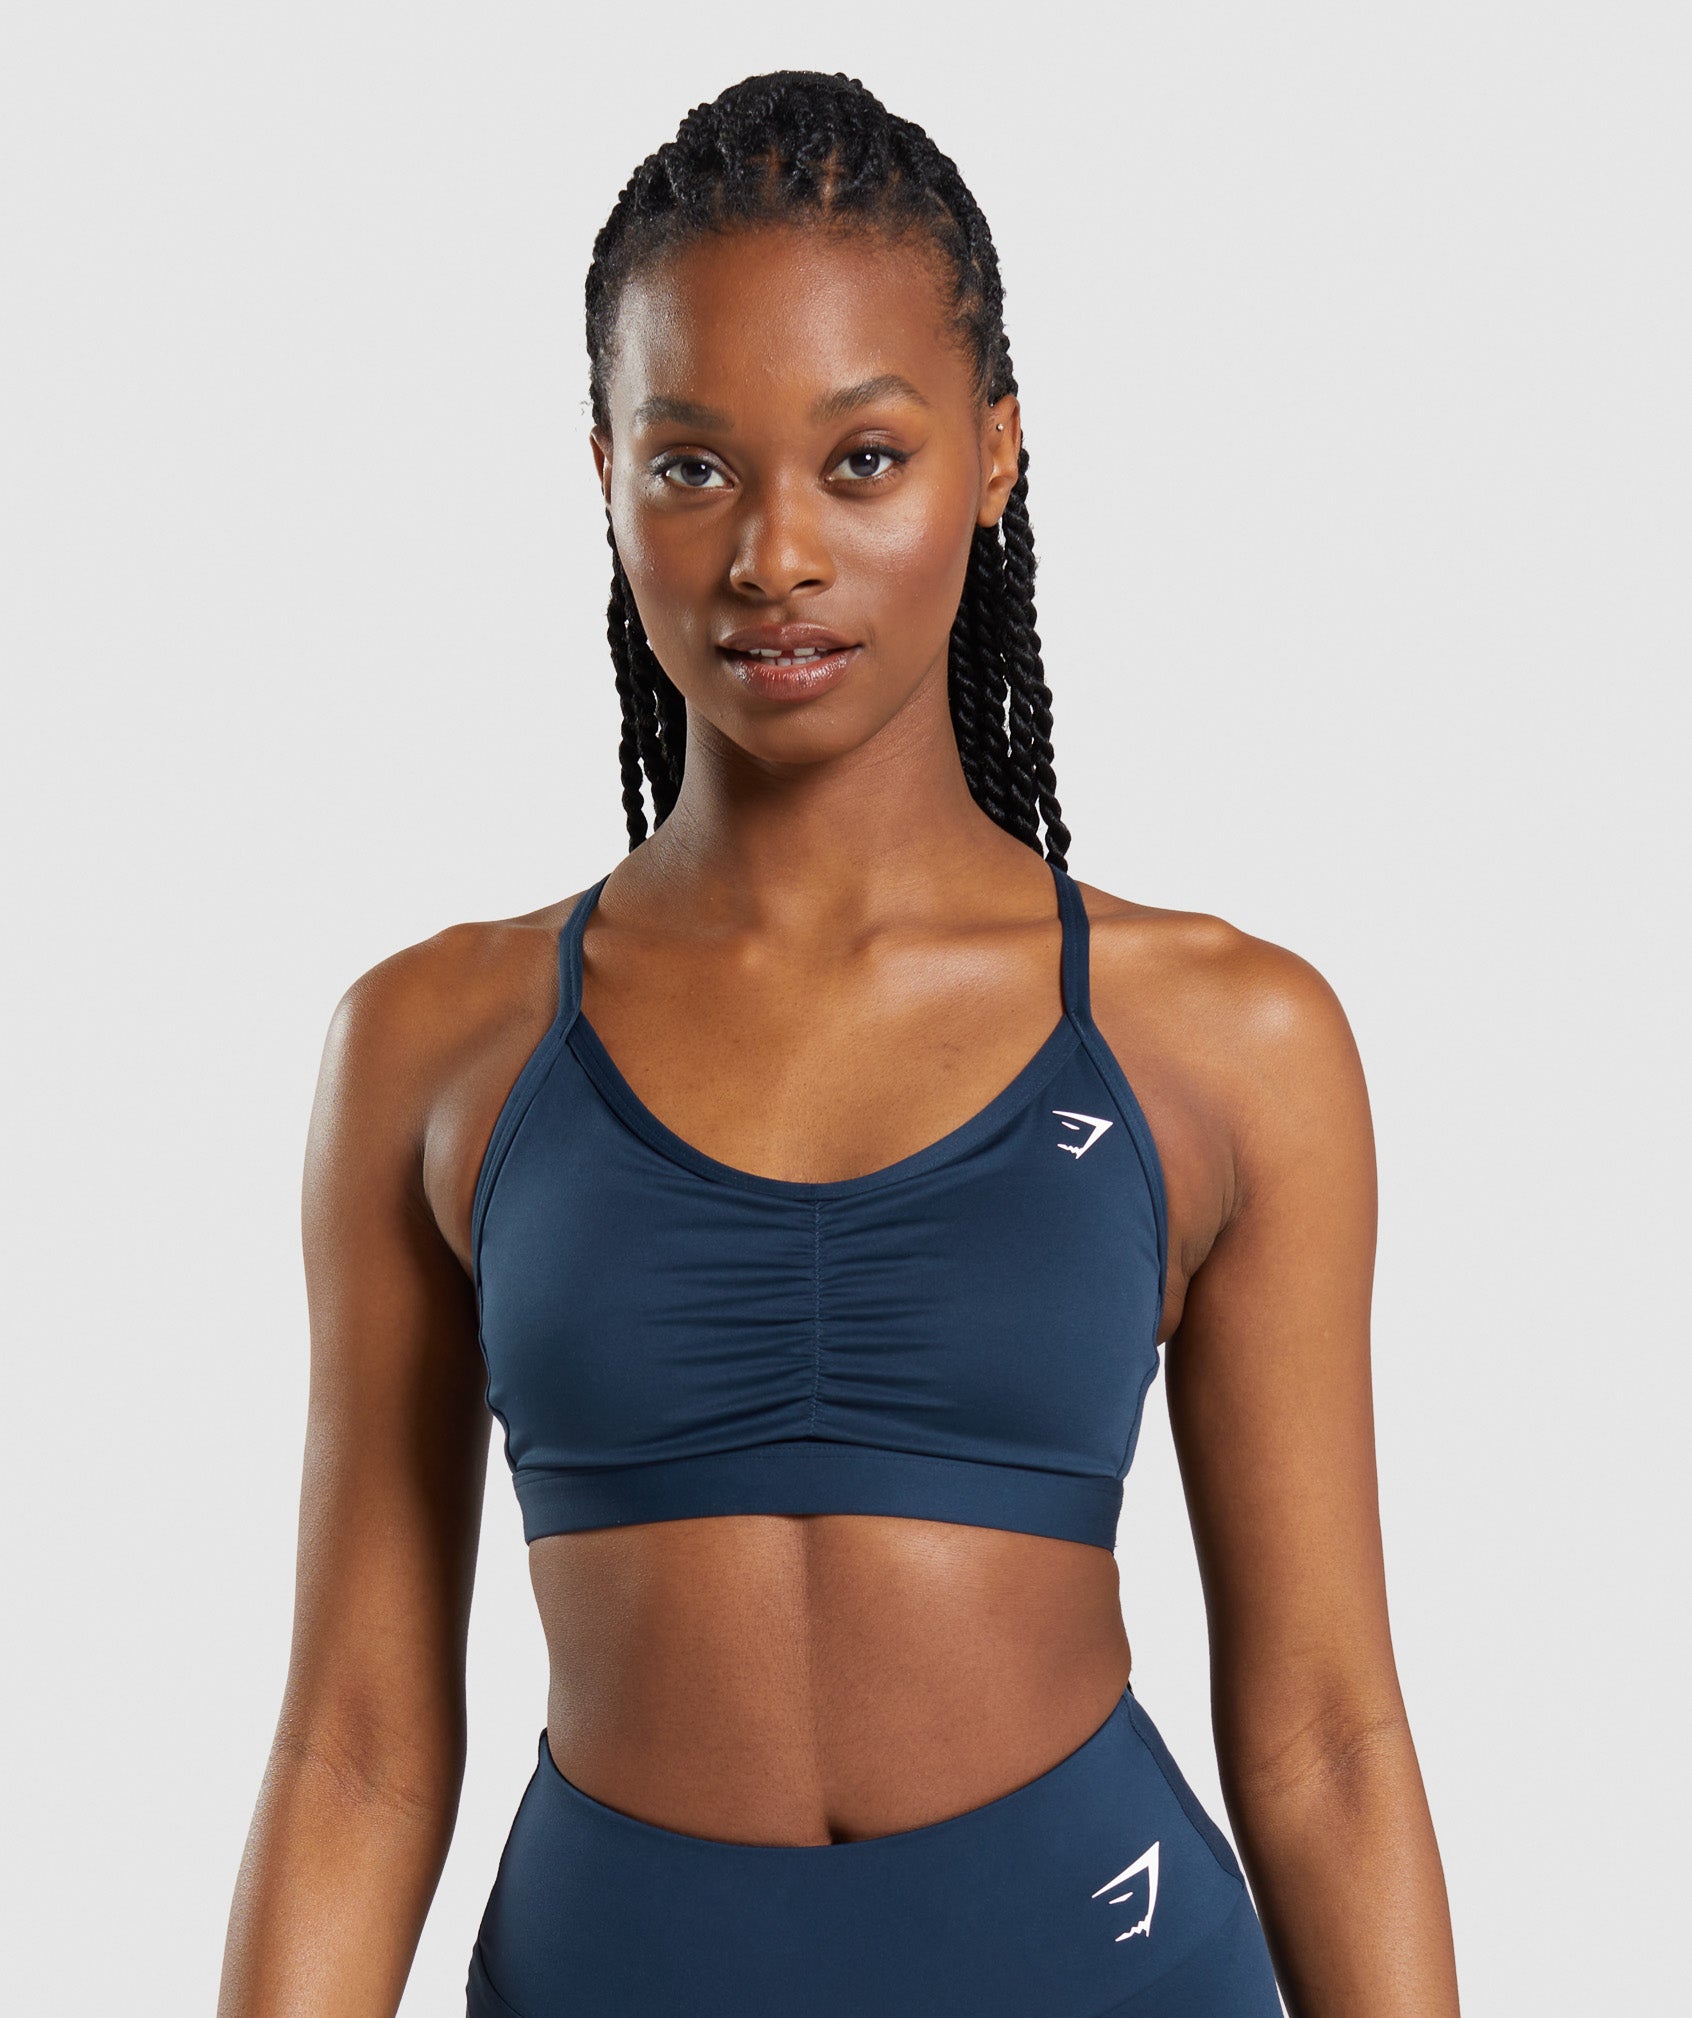 GYMSHARK RUCHED SPORTS Bra Navy Blue Size Small £22.50 - PicClick UK